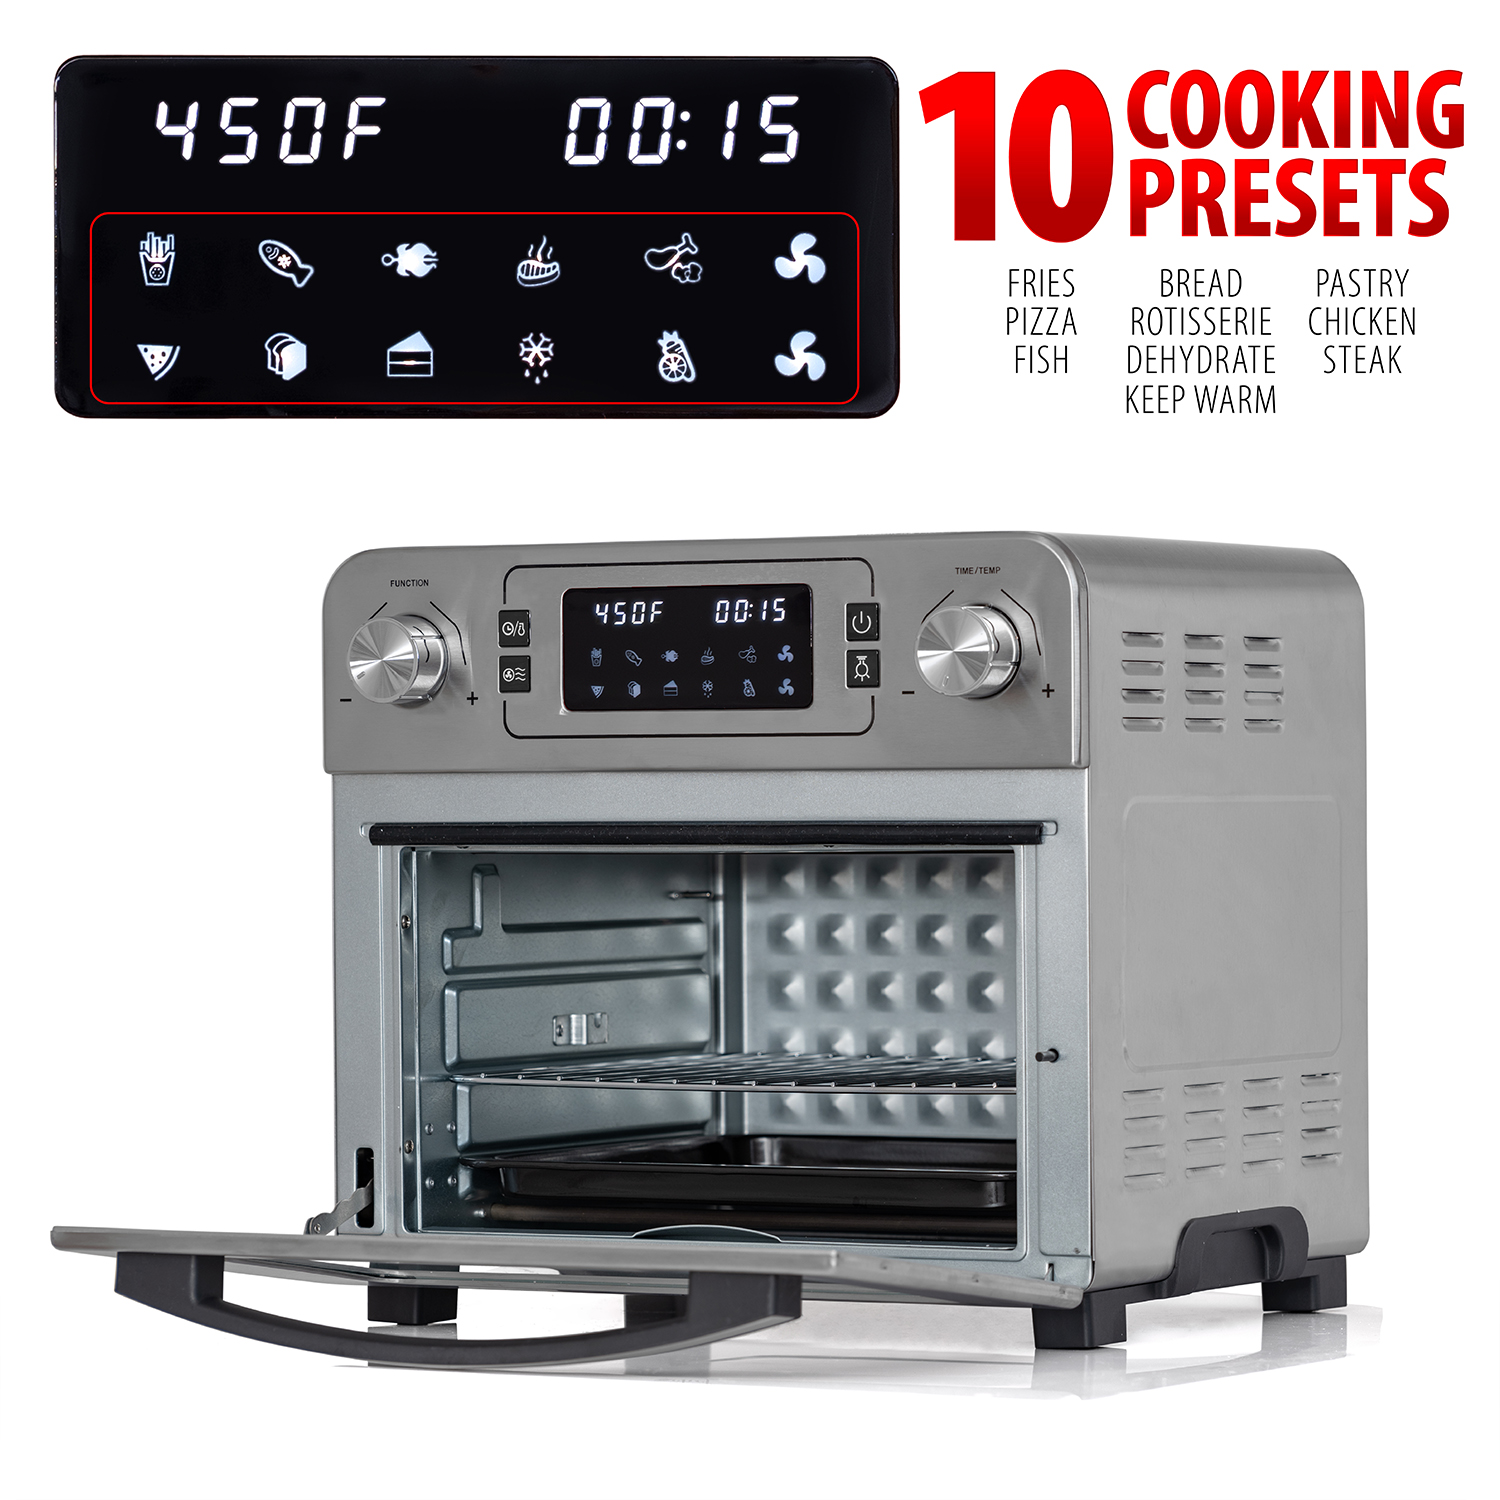 Deco Chef 24 QT Stainless Steel Countertop 1700 Watt Toaster Oven with Built-in Air Fryer and Included Rotisserie Assembly, Grill Rack, Frying Basket, and Baking Pan - image 4 of 11